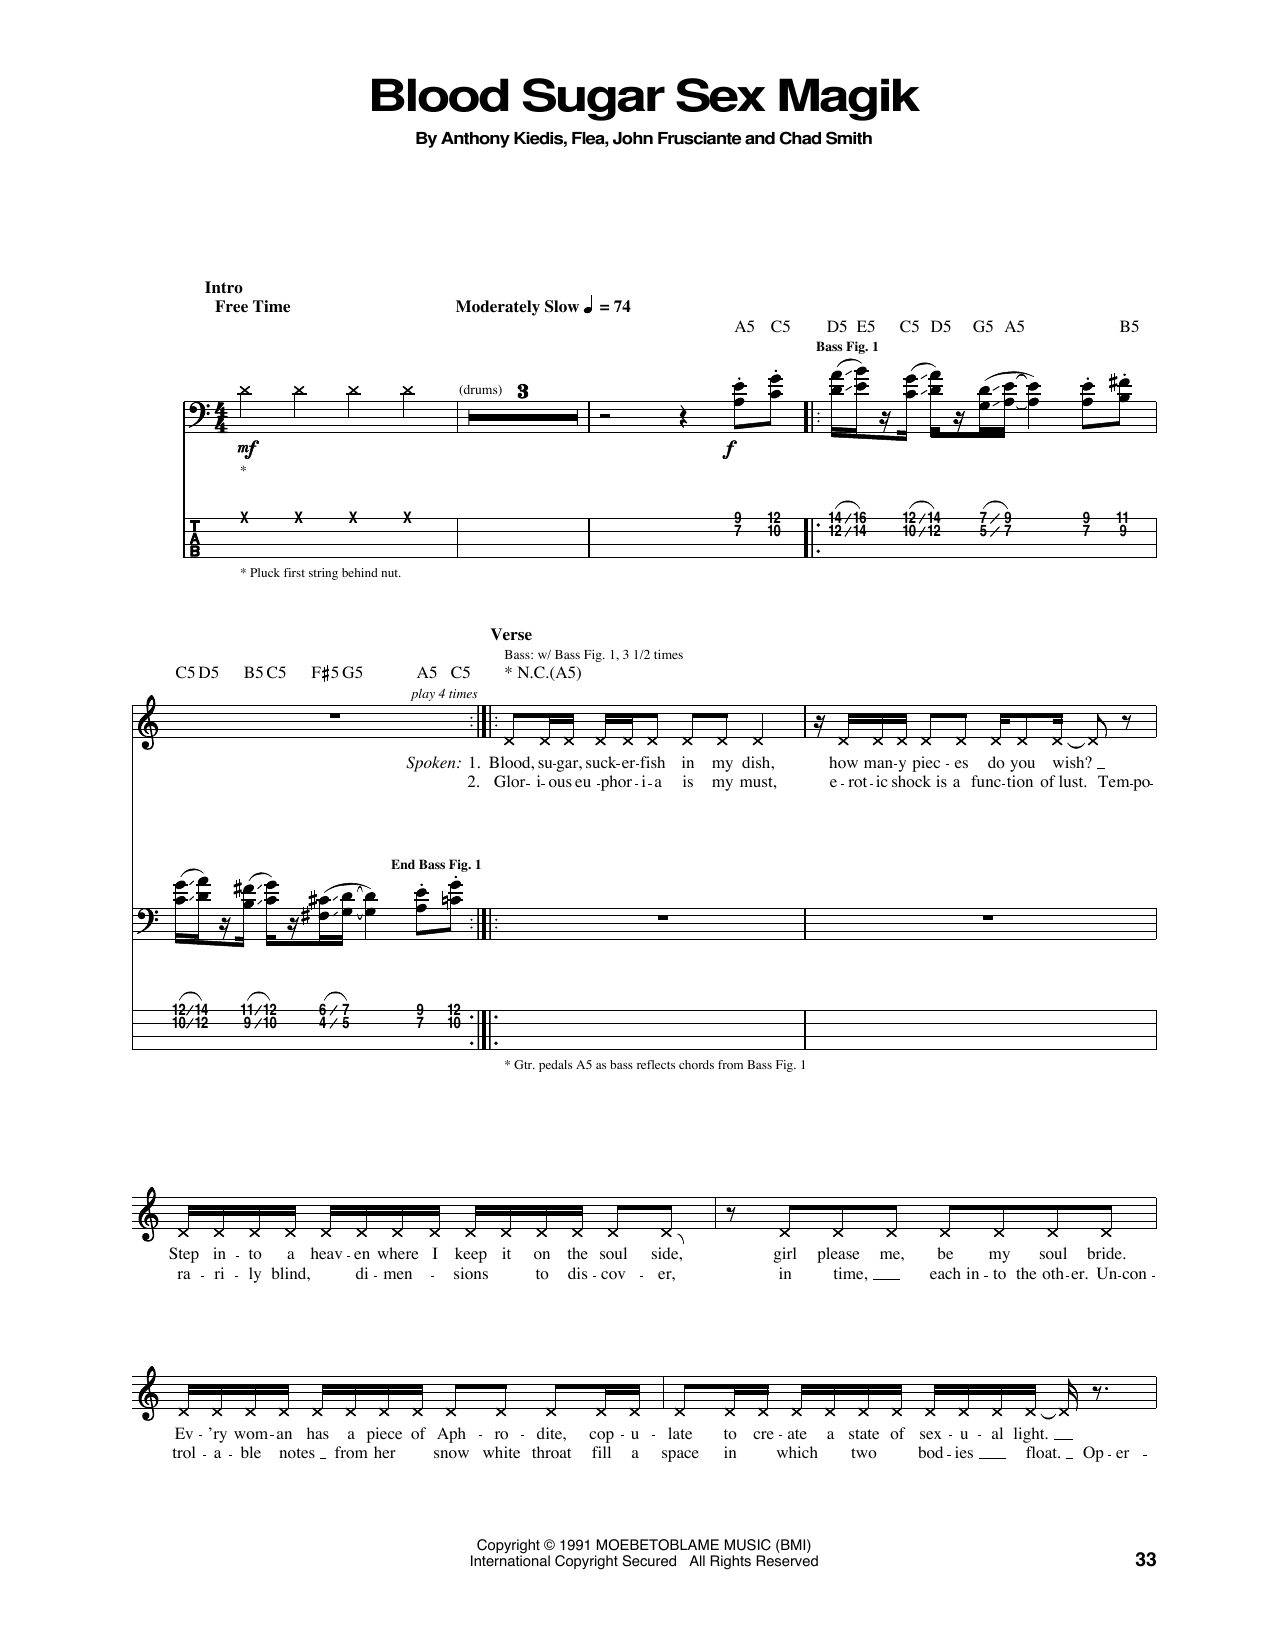 Download Red Hot Chili Peppers Blood Sugar Sex Magik Sheet Music